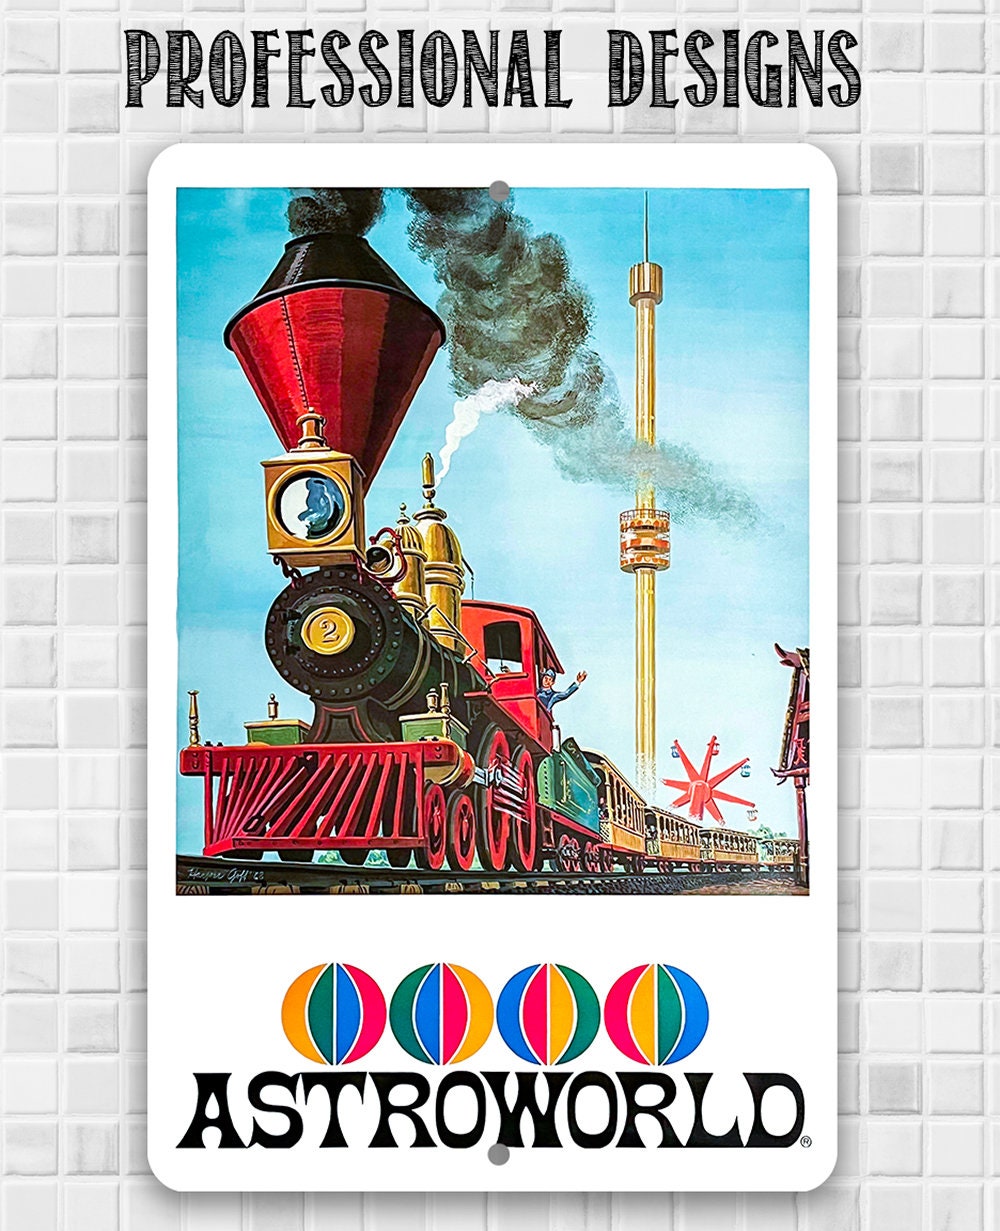 Tin - Metal Sign - AstroWorld Park Train - 8"x12" or 12"x 18" Use Indoor/Outdoor - Gift for Amusement Park Enthusiasts Lone Star Art 